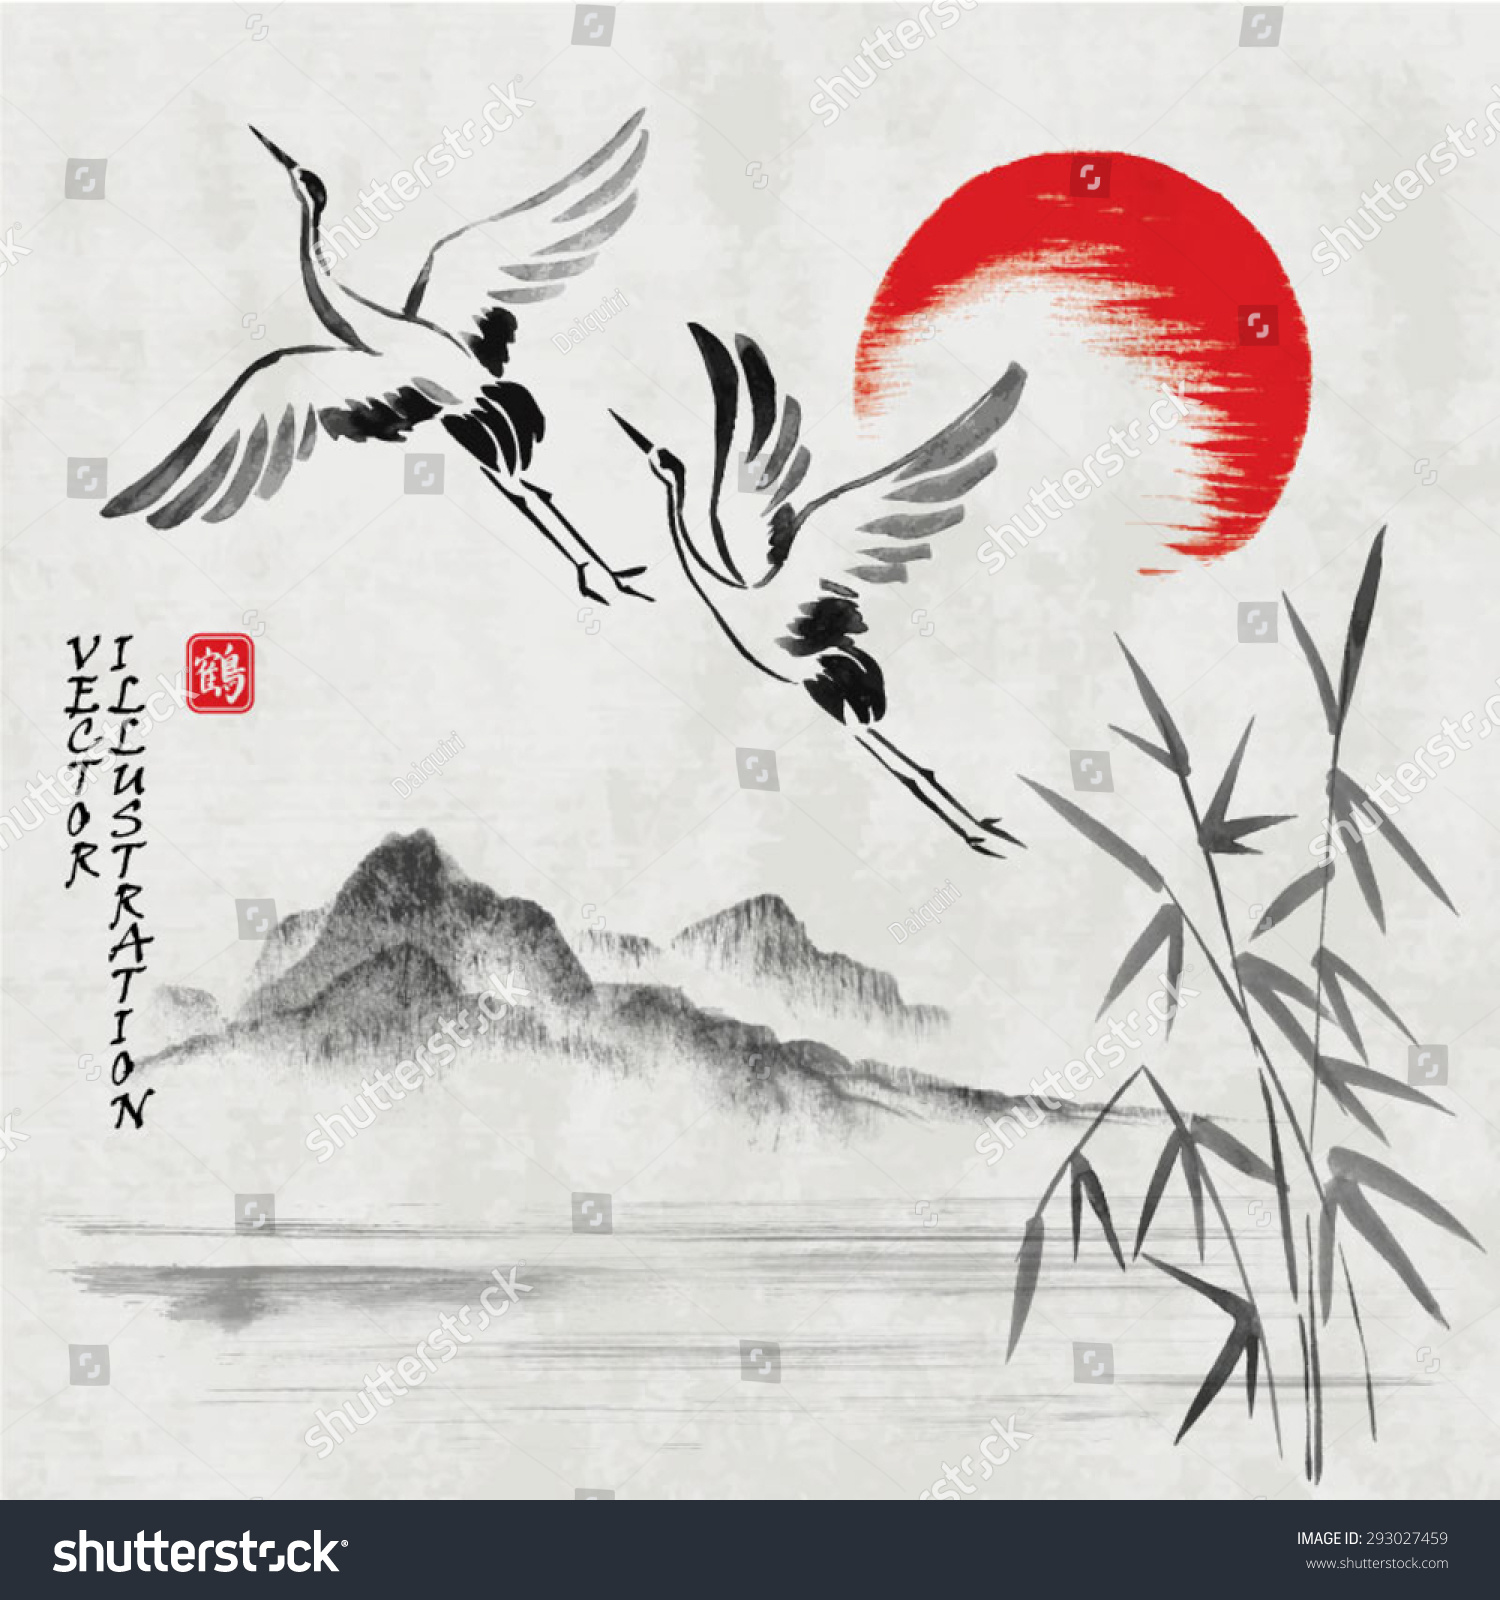 Landscape With Hills, Lake, Sun And Storks In Traditional Japanese Sumi ...